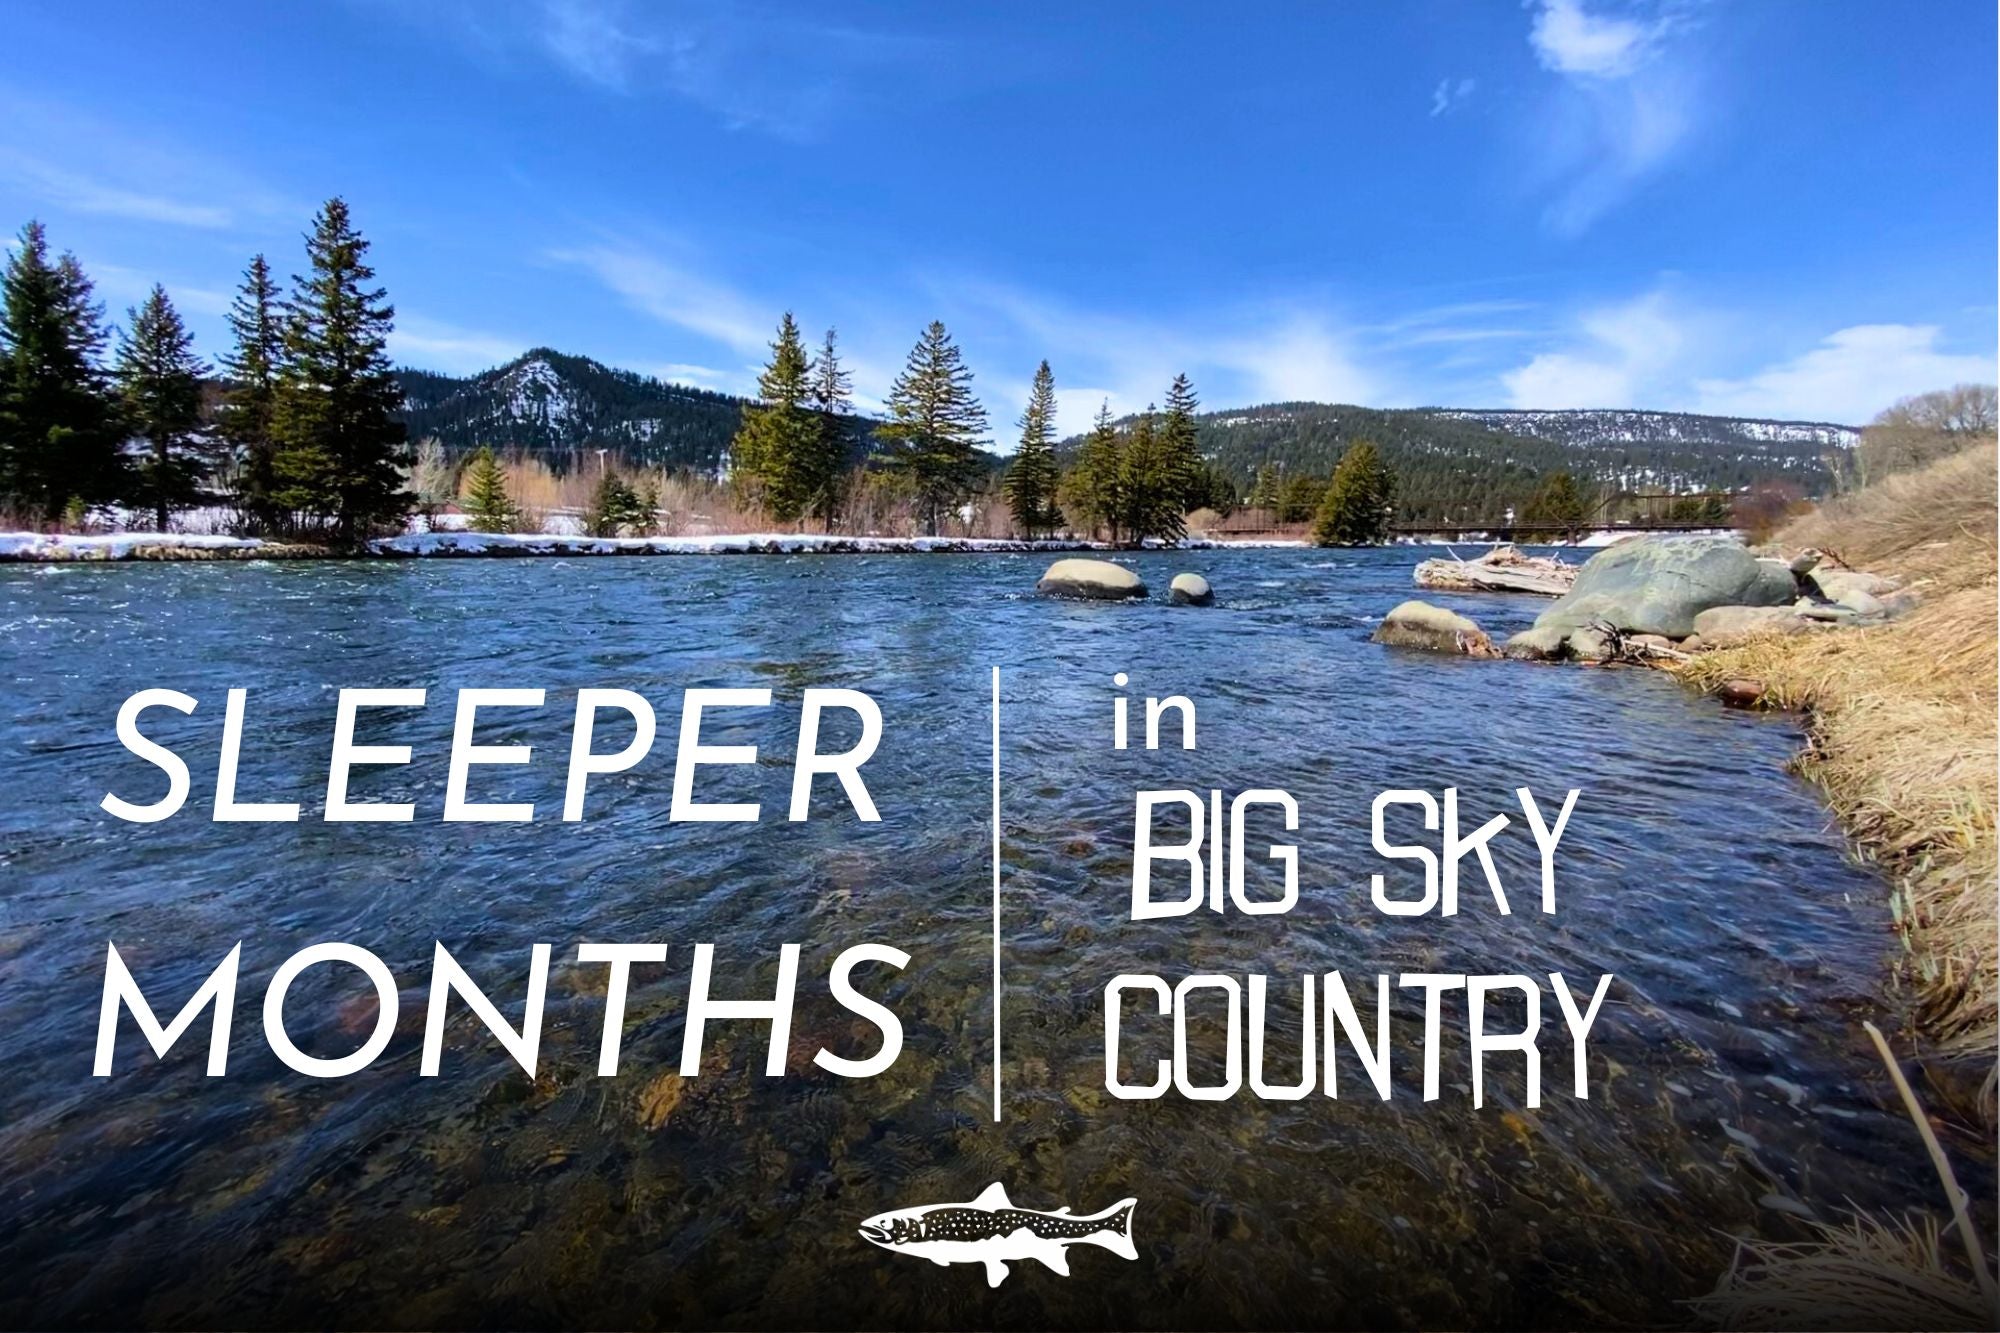 Sleeper Months in Big Sky Country